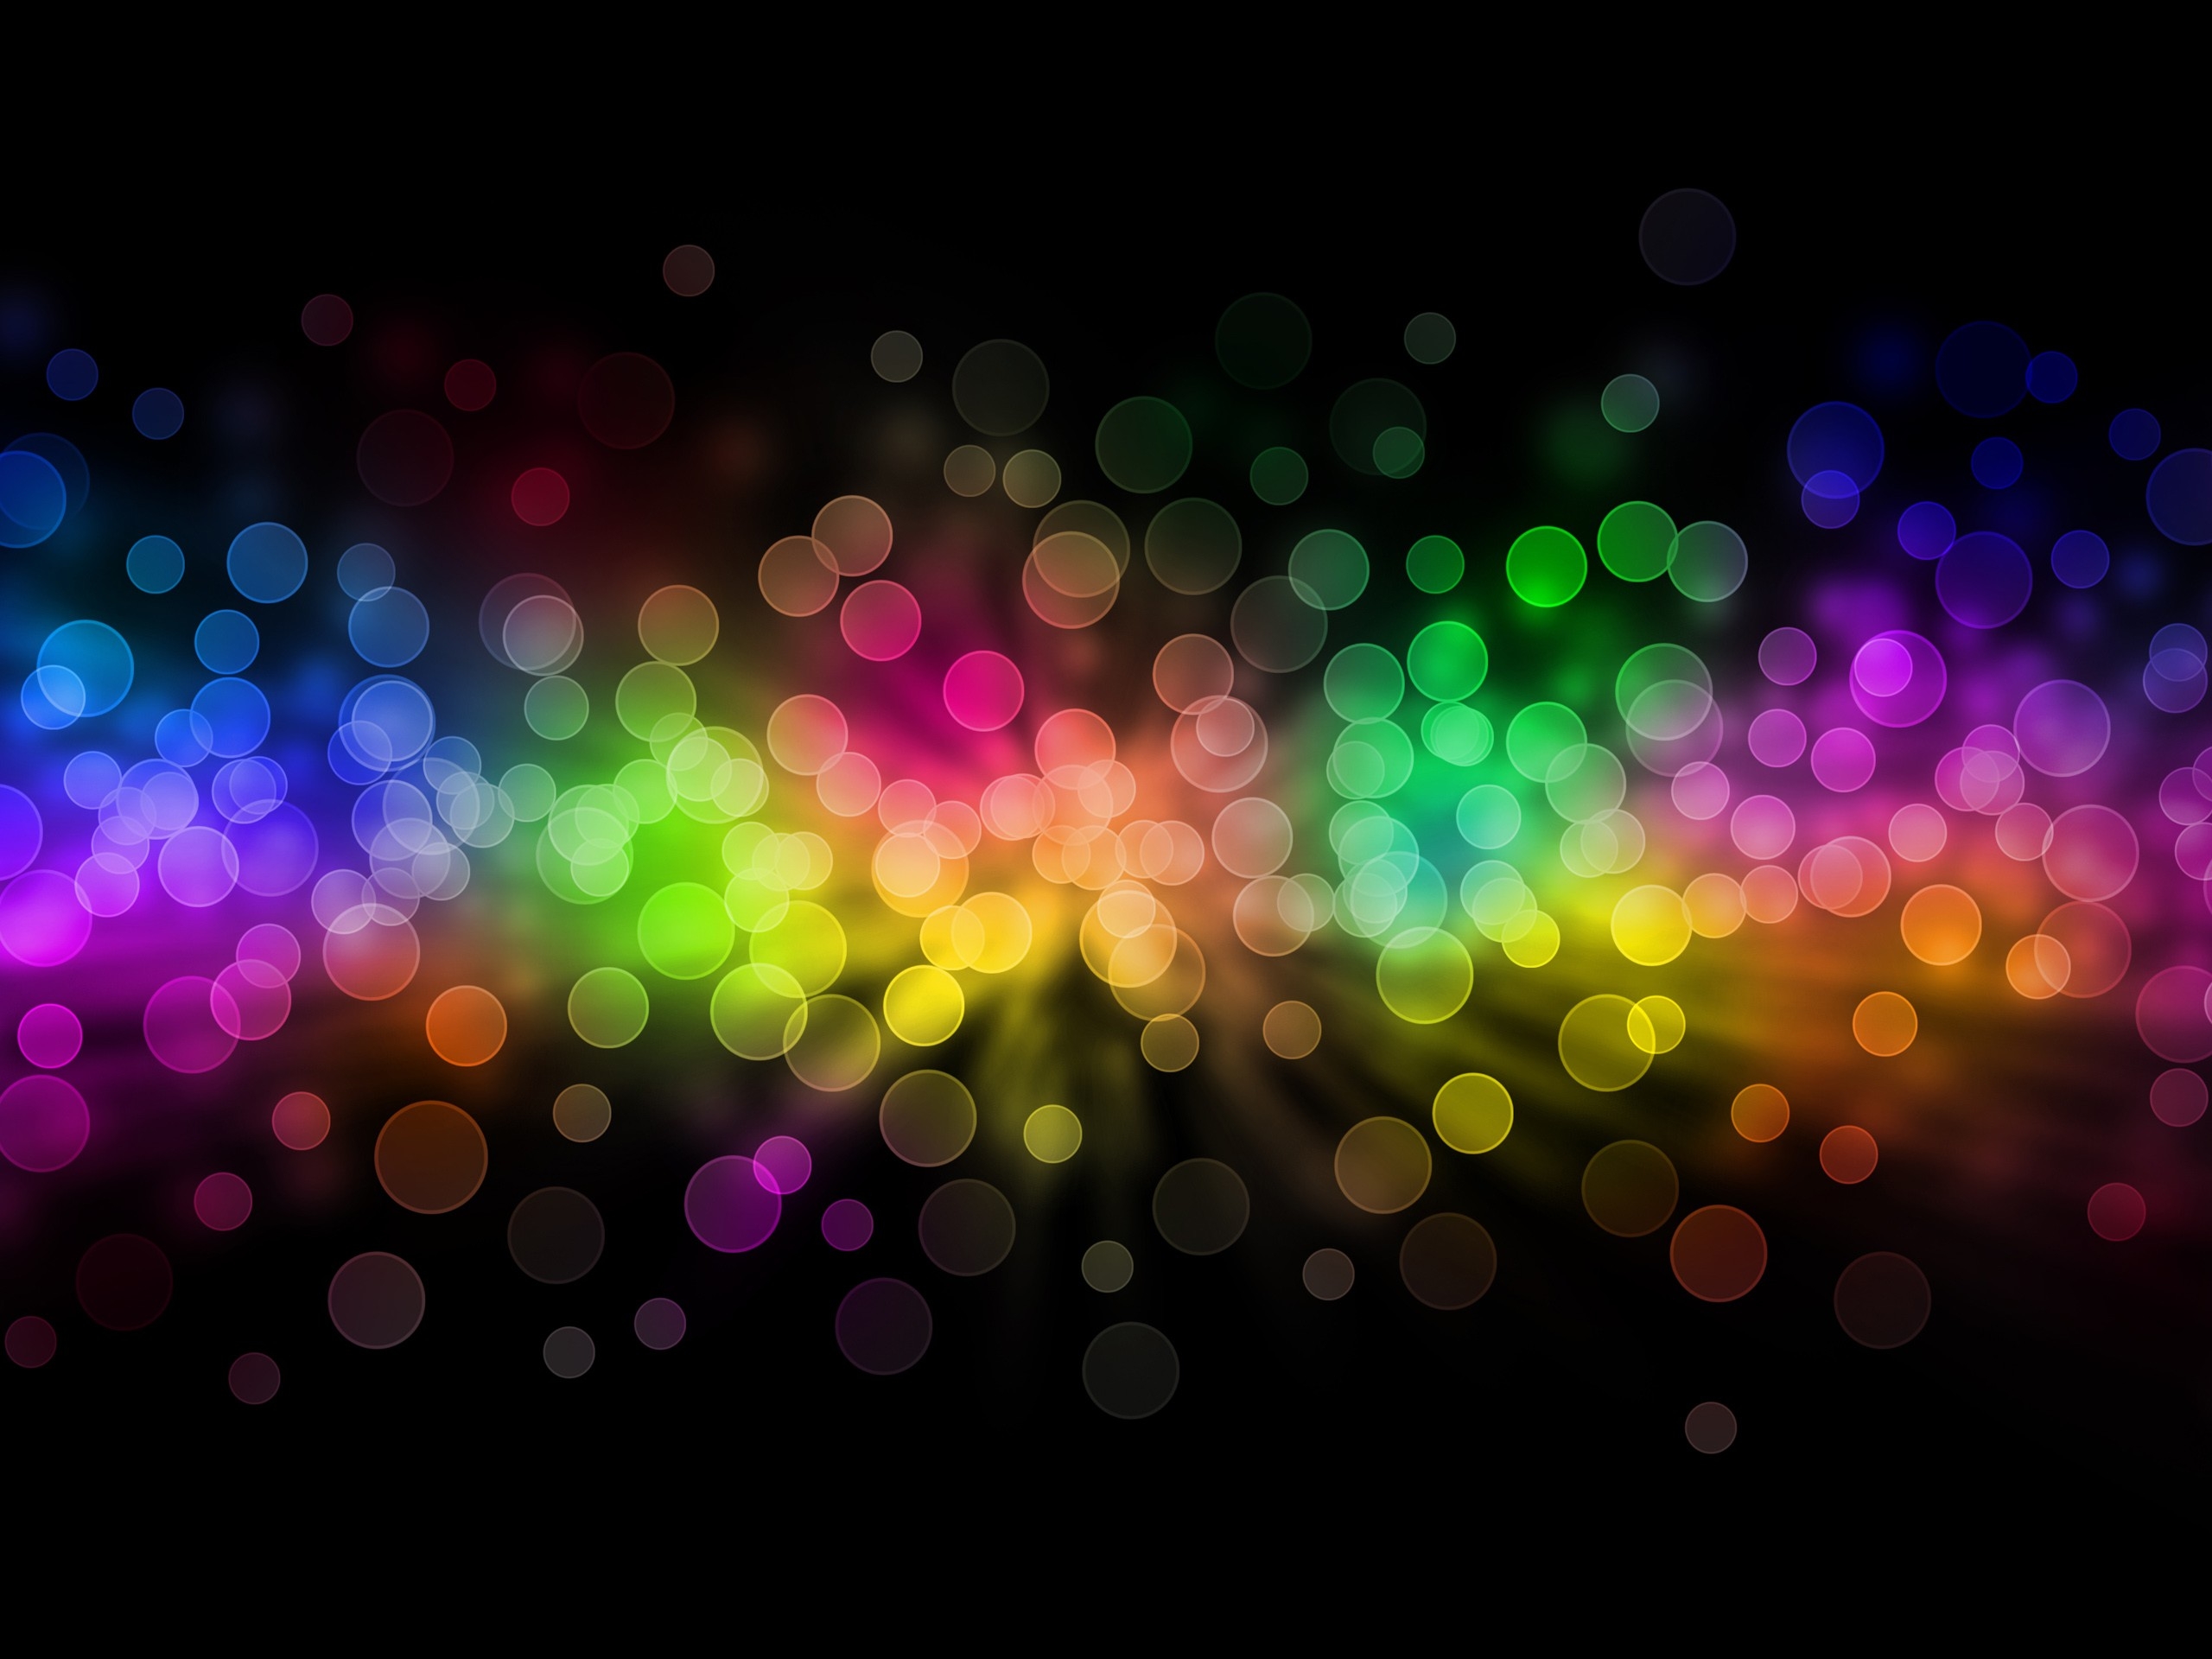 Download PC Wallpaper rainbow, background, abstract, glare, circles, iridescent